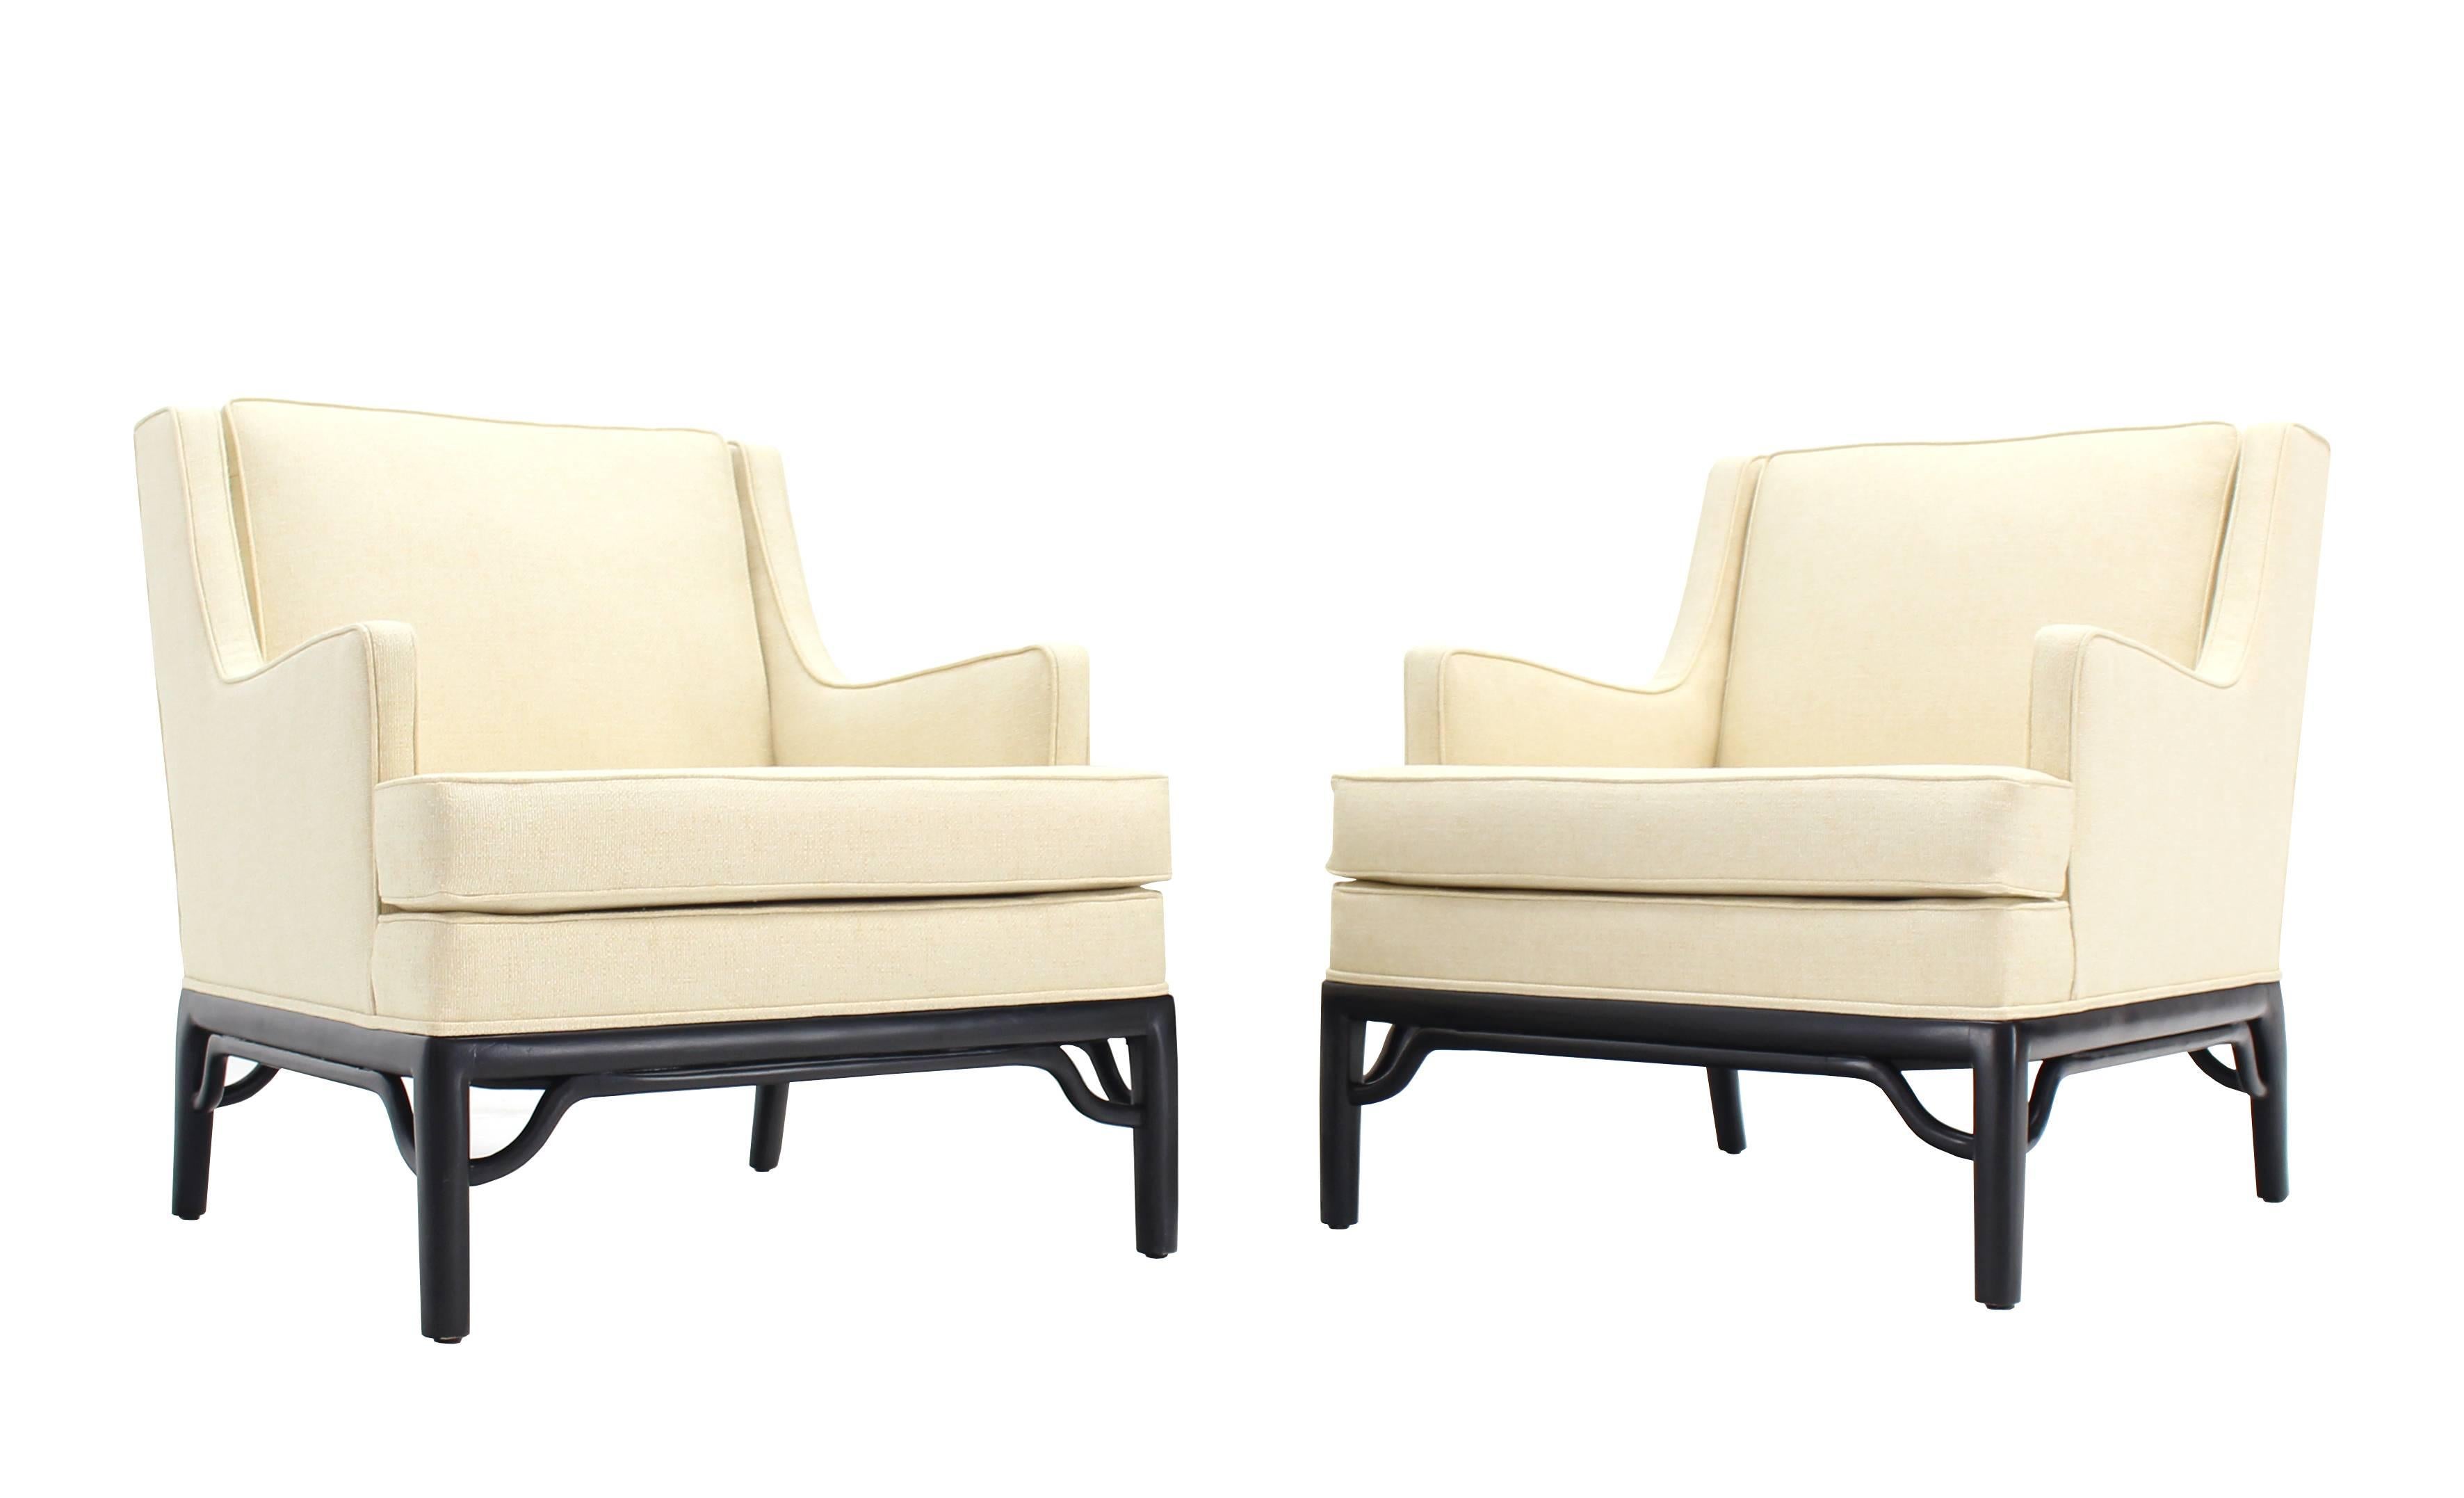 Very nice pair of newly upholstered, Mid-Century Modern lounge chairs.